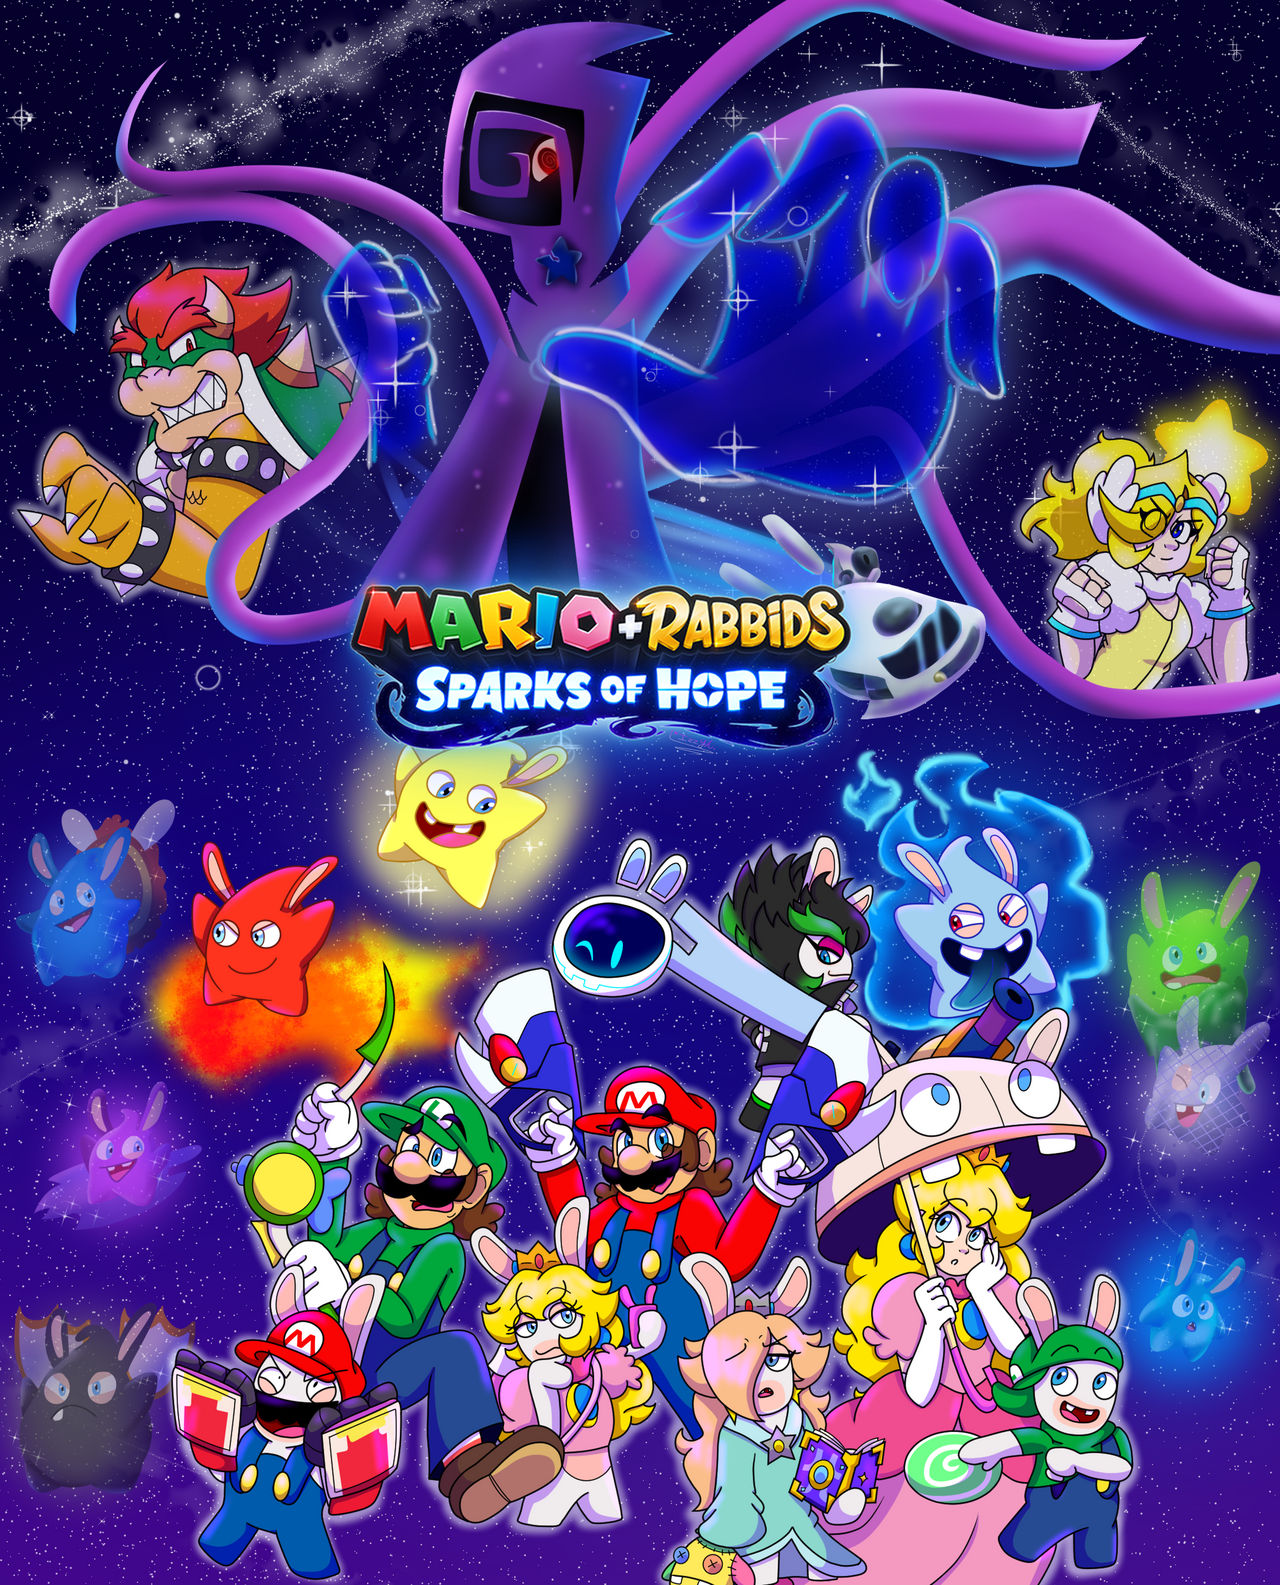 Mario + Rabbids Sparks of Hope Cover by IzzyoftheStars on DeviantArt